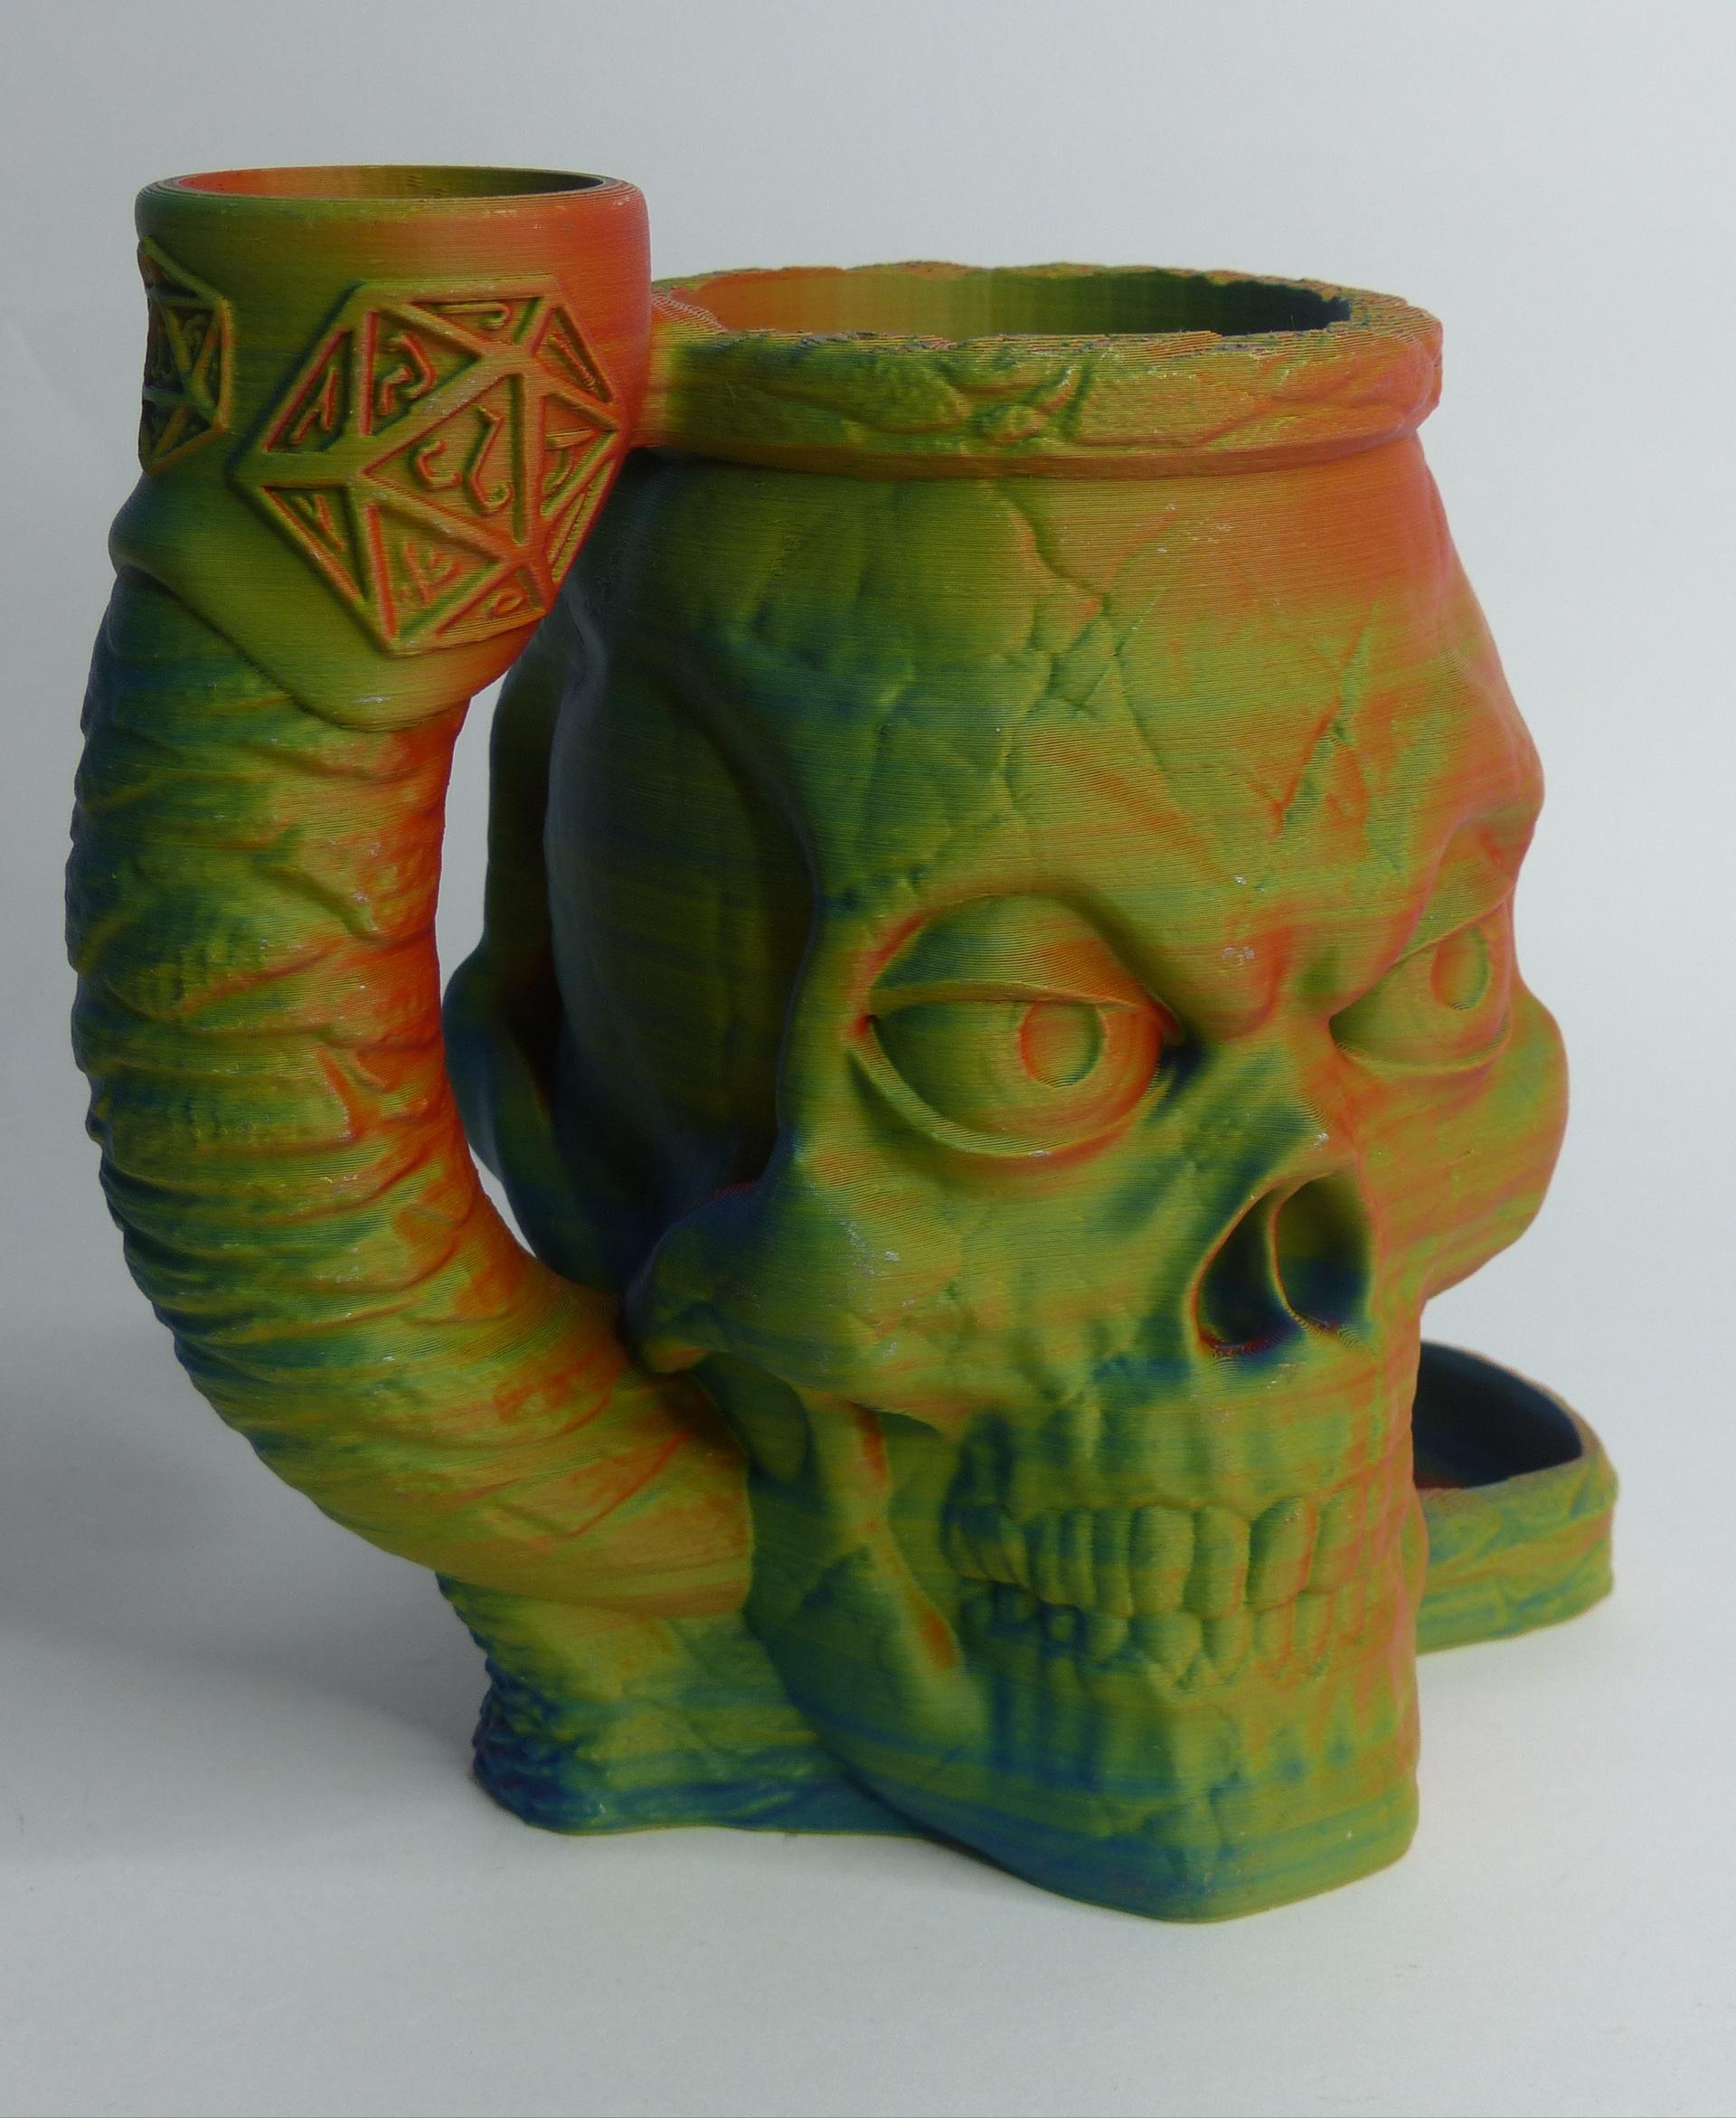  Skull Dice Tower can cozy  3d model